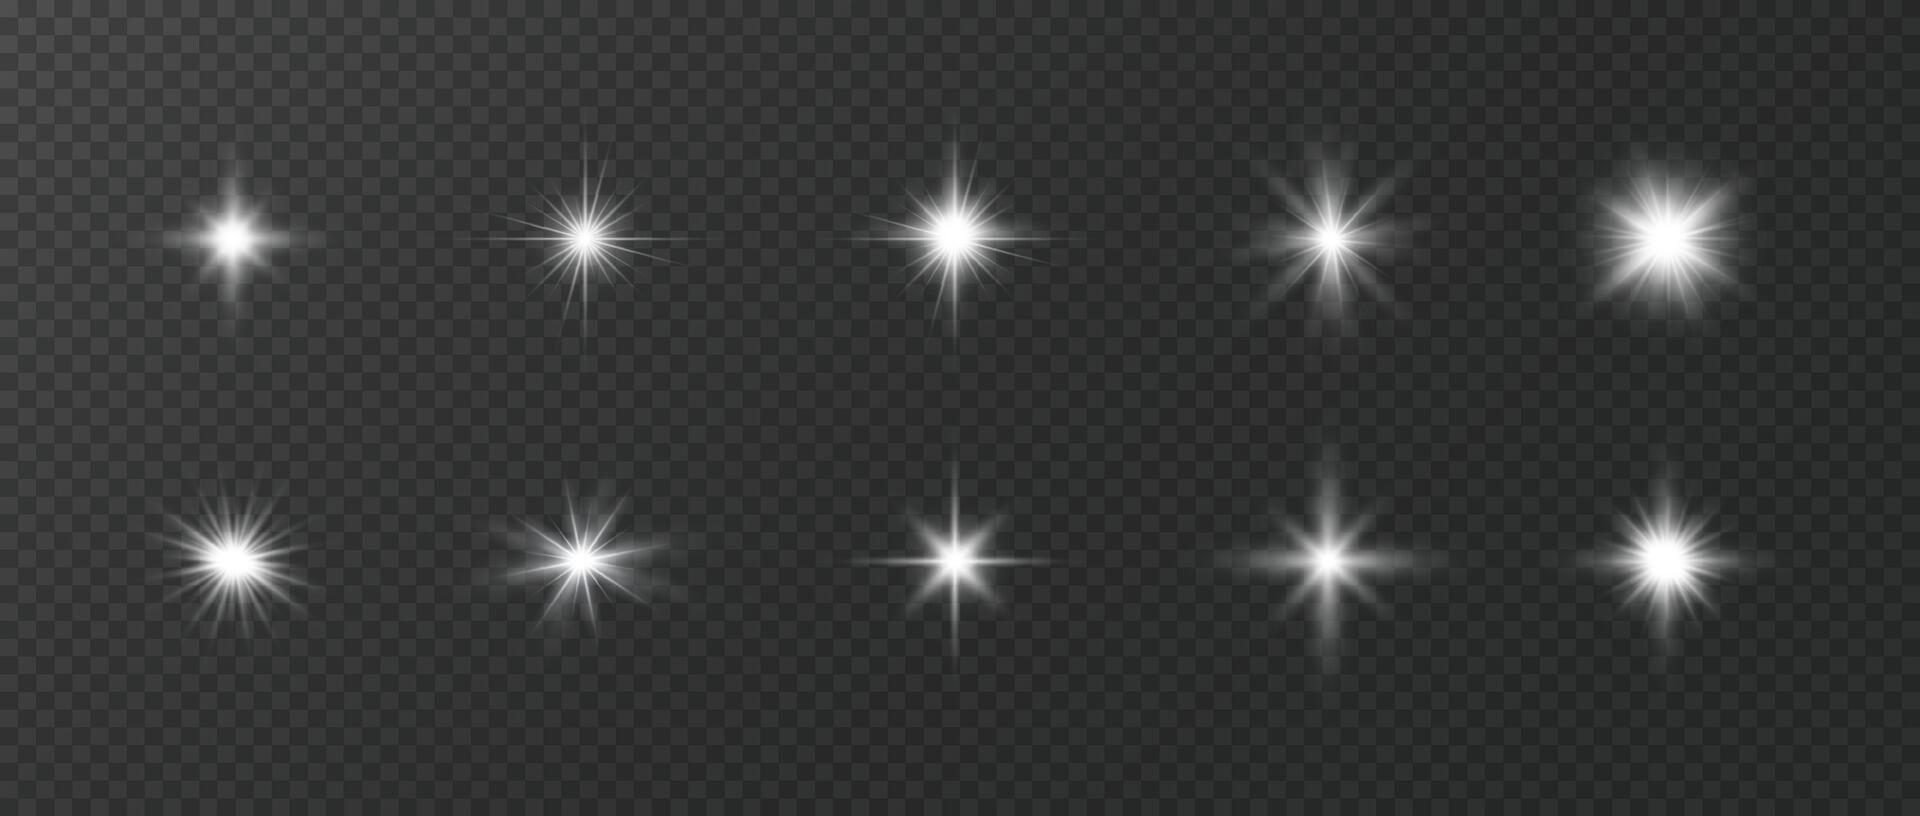 Star shine set. White light rays collection. vector